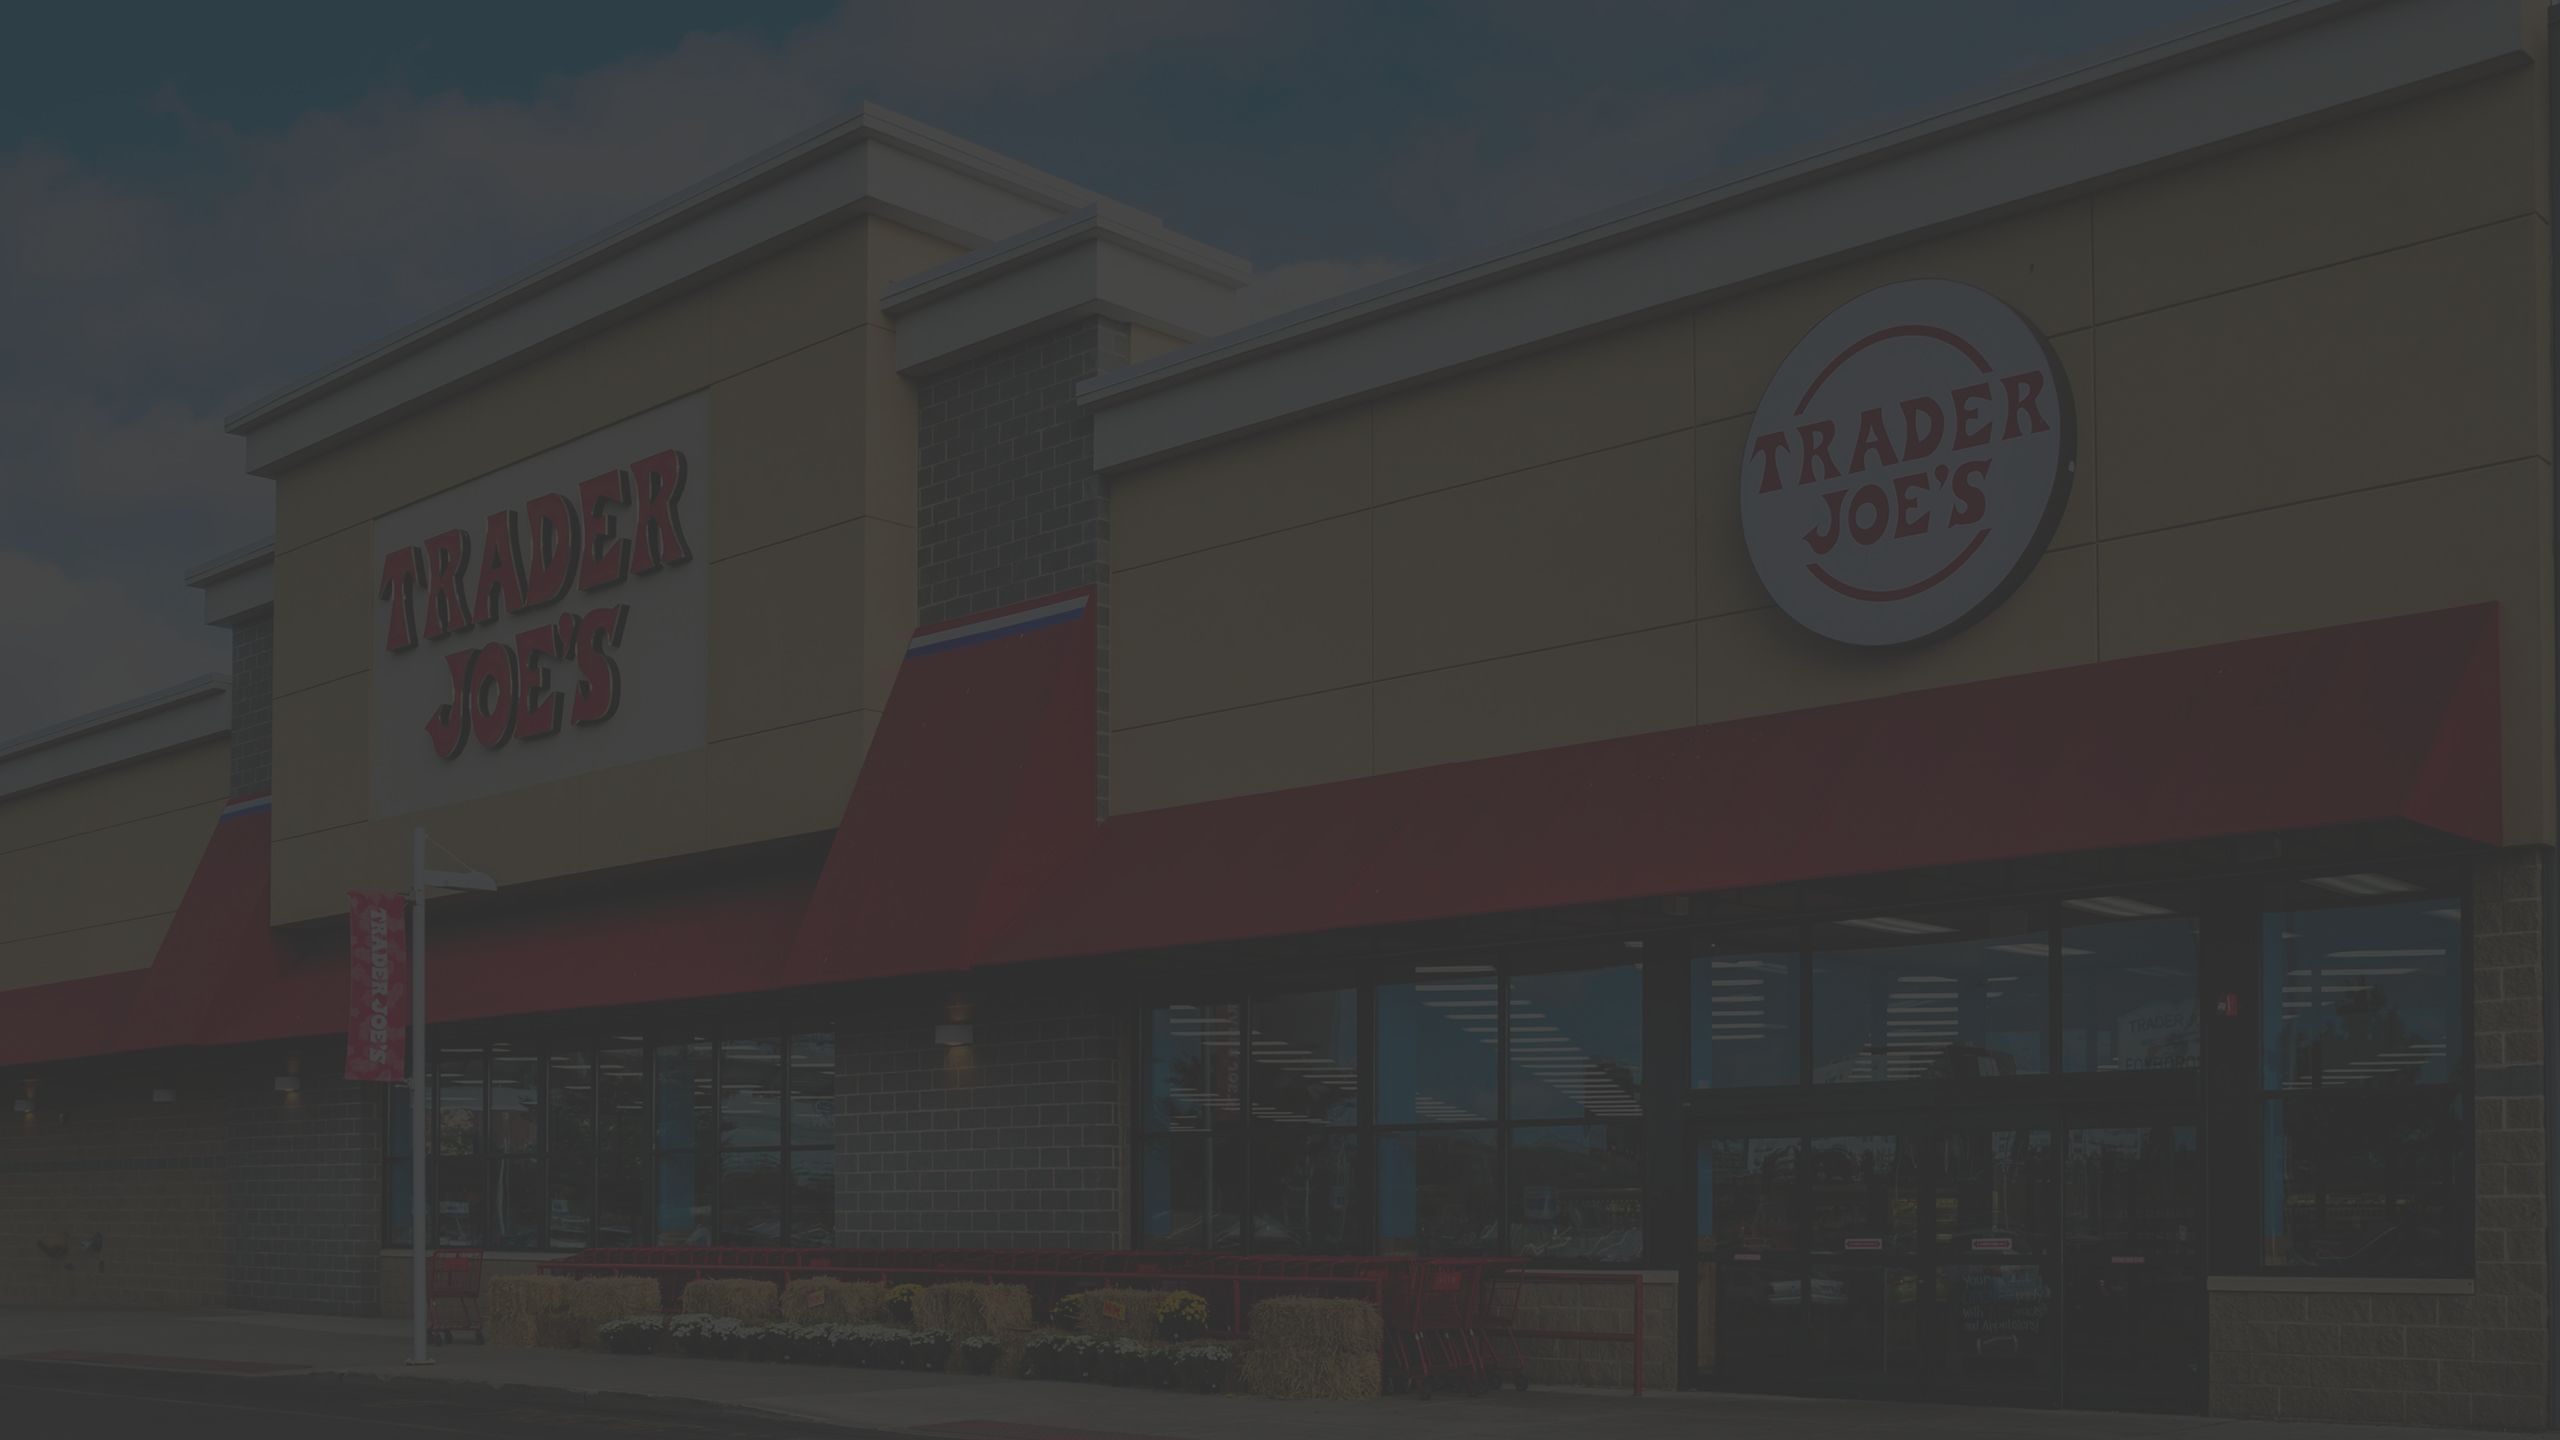 6 Low-Calorie Foods To Buy at Trader Joe's | Nutrition and Weight Loss